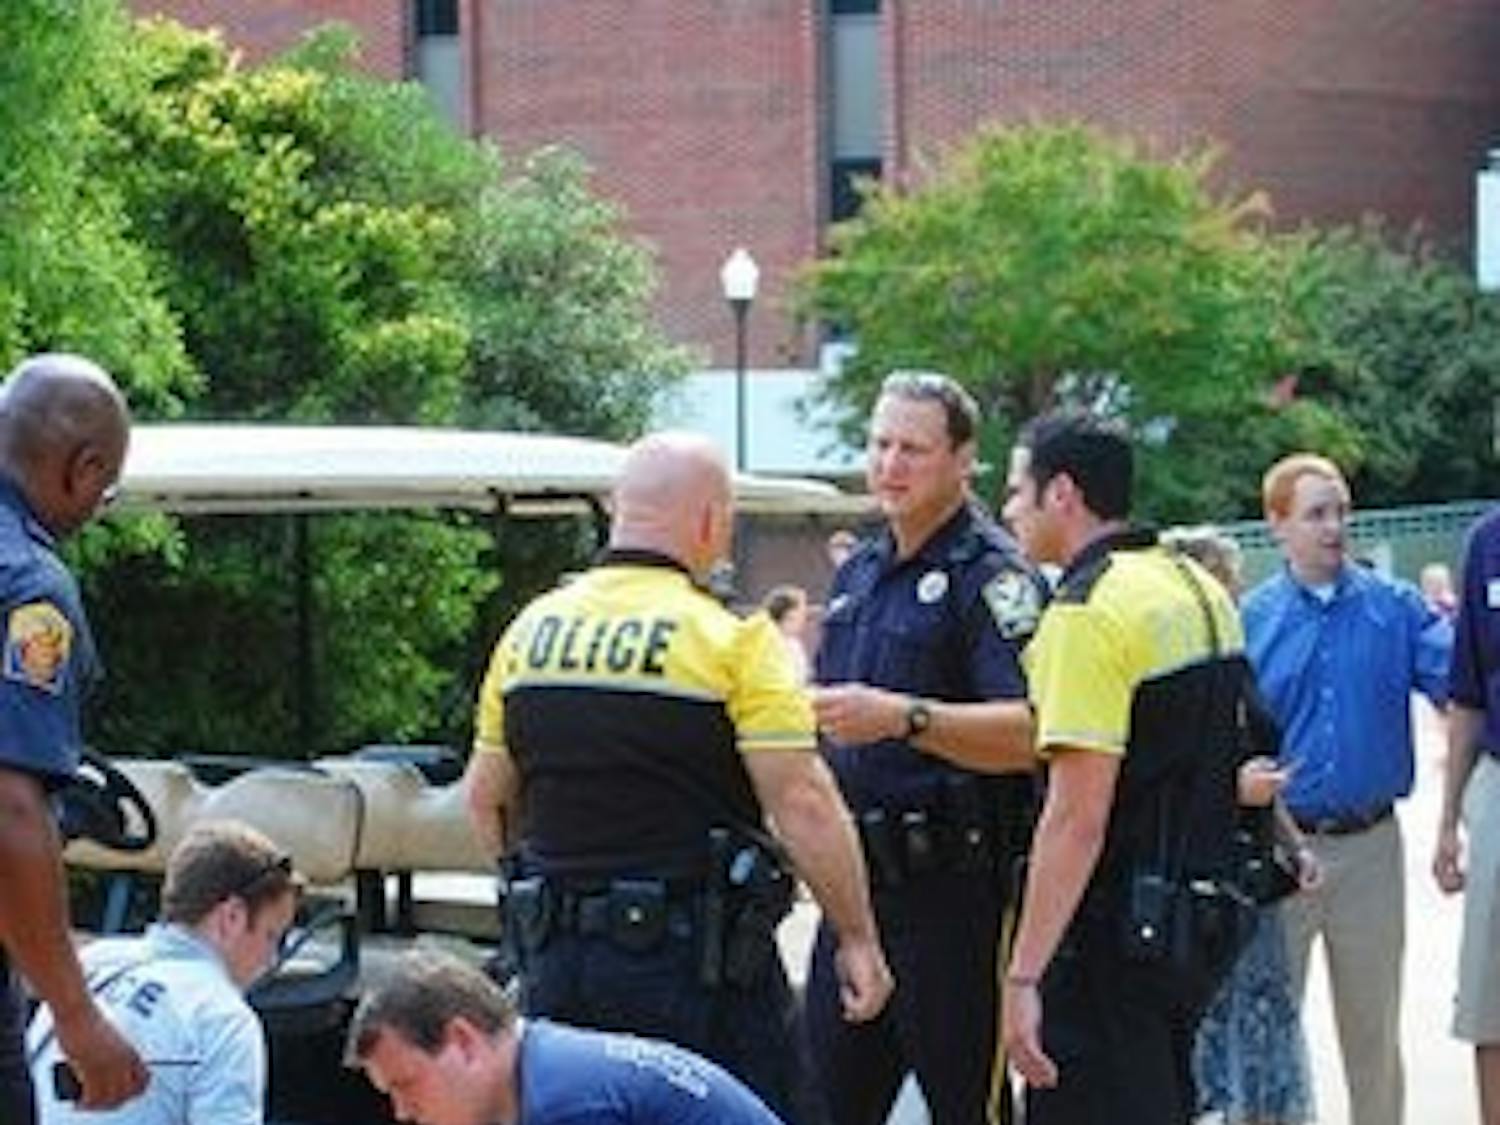 Auburn police officers and EMT personnel clean up materials in front of Little Hall where a man collapsed on Monday afternoon. (Derek Lacey / ASSOCIATE CAMPUS EDITOR)